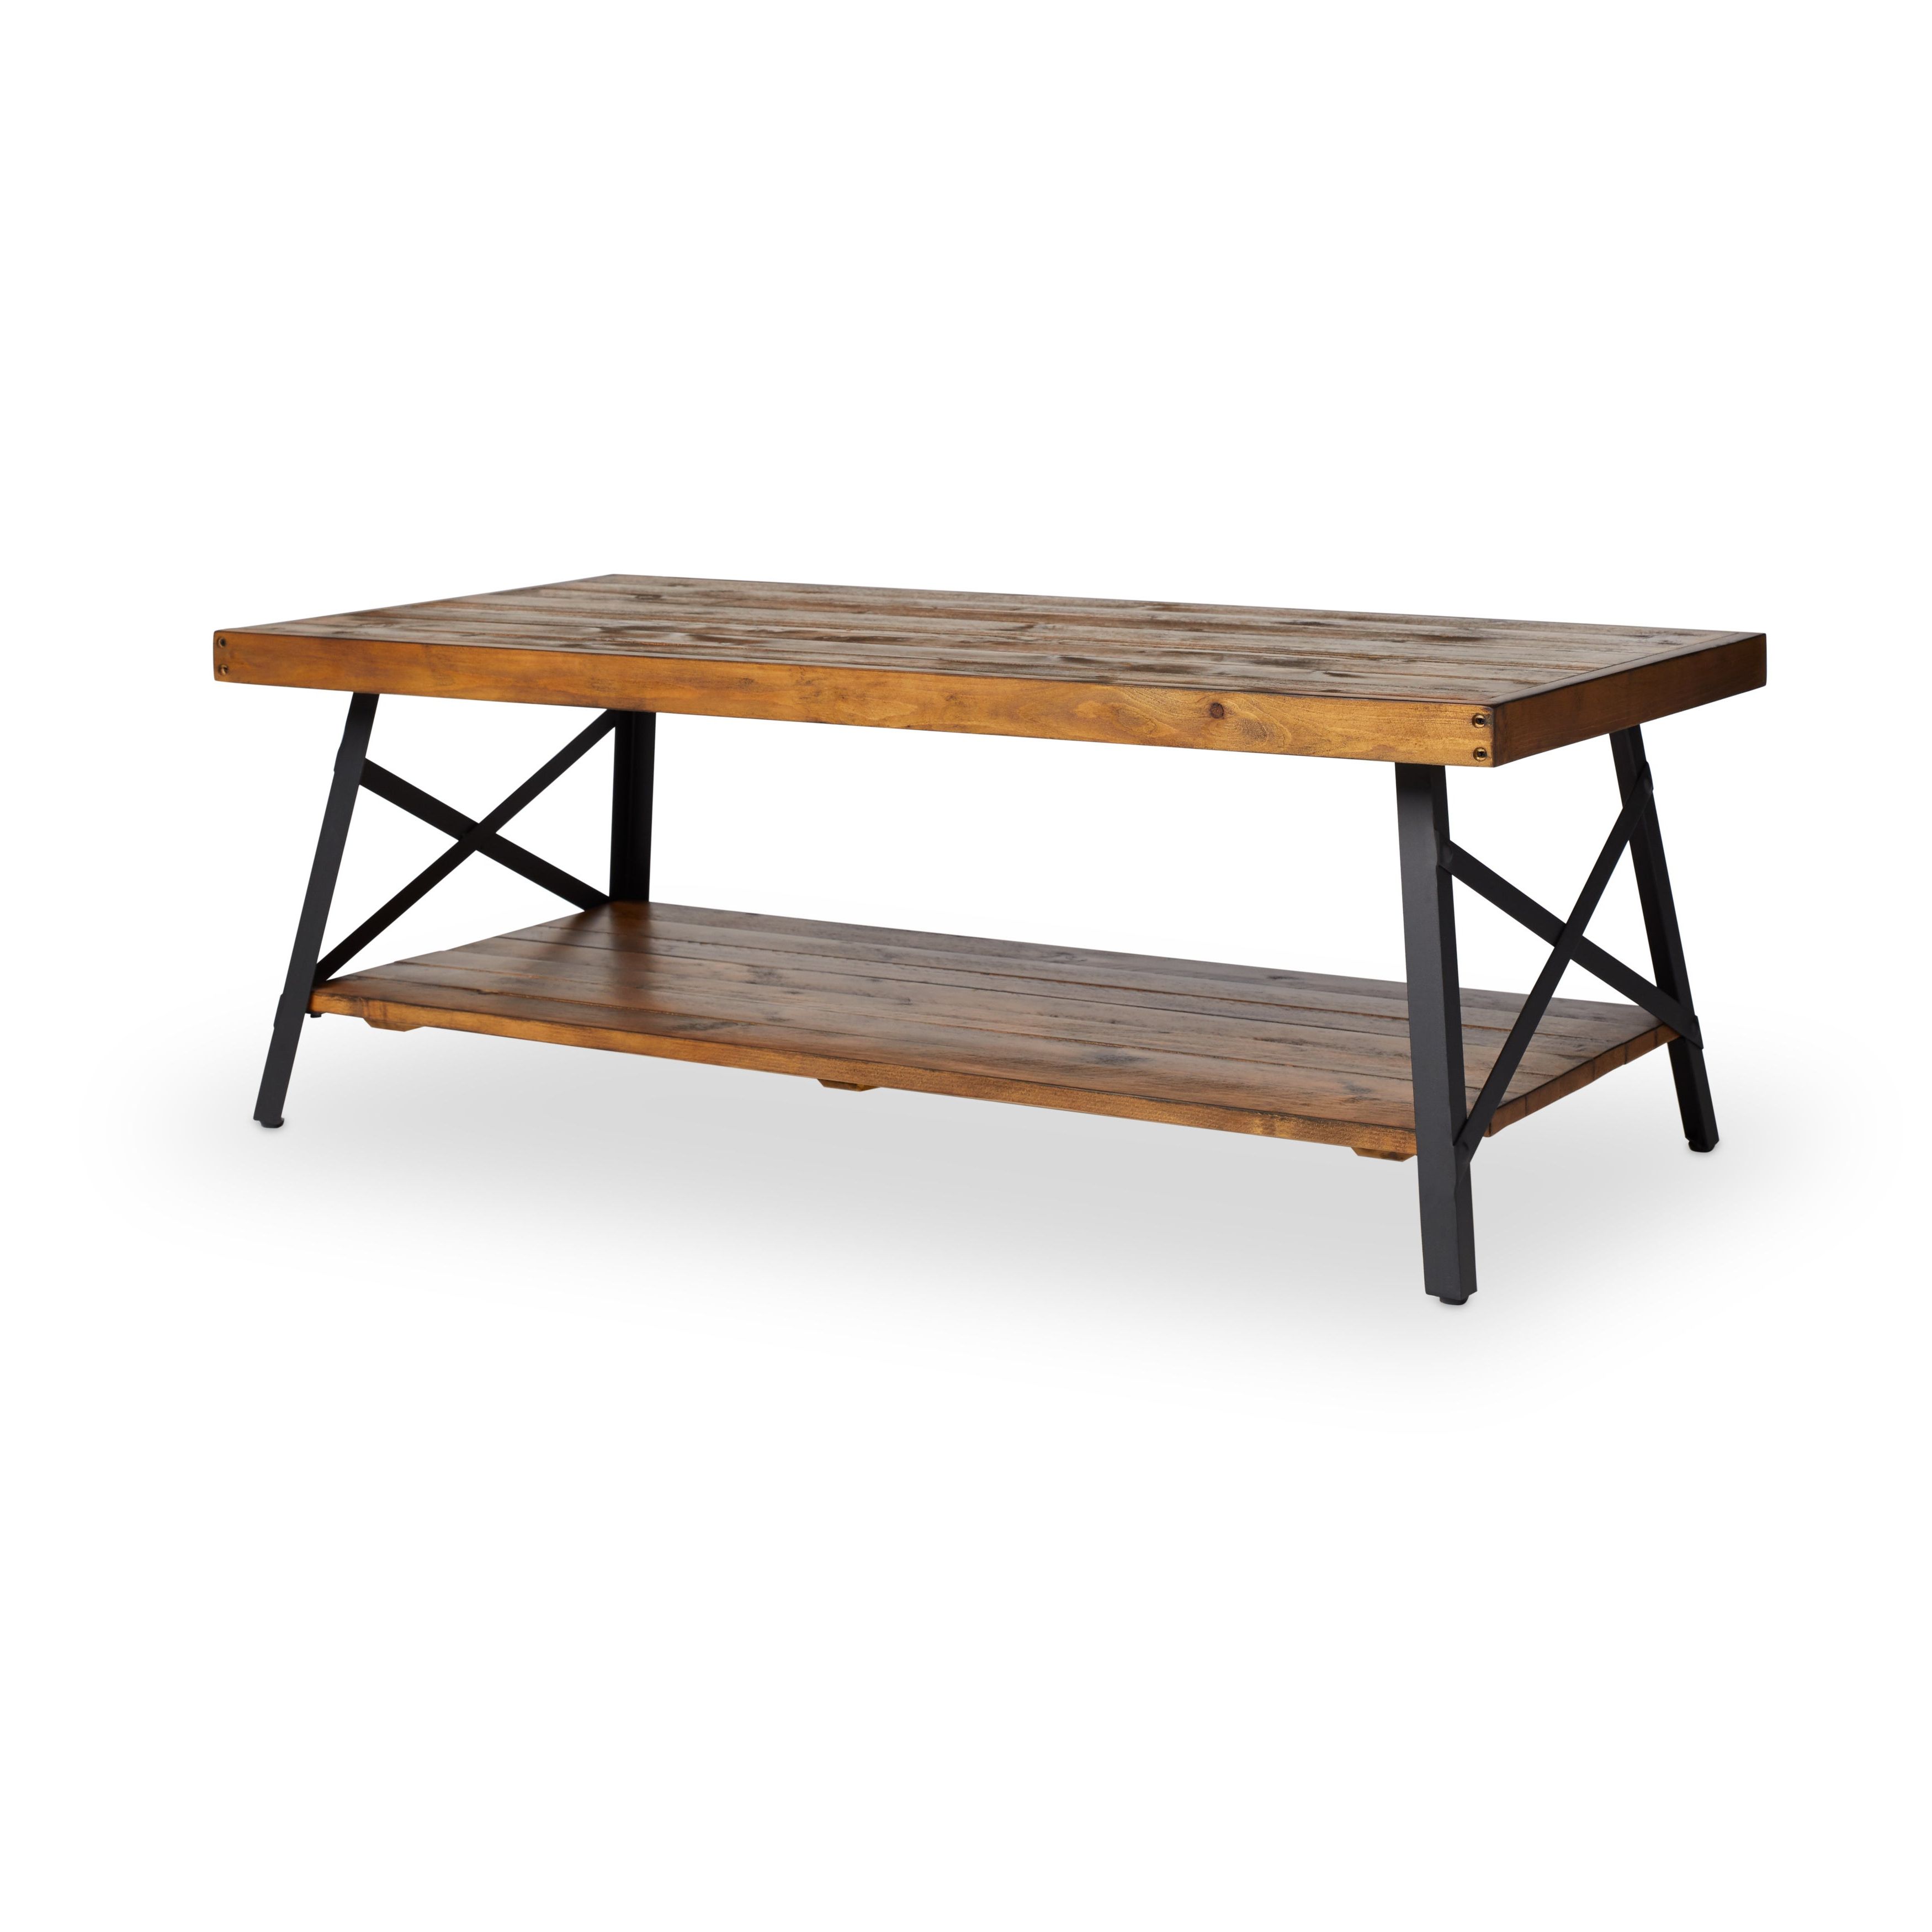 Preferred Carbon Loft Enjolras Wood Steel Coffee Tables Throughout Carbon Loft Oliver Modern Rustic Natural Fir Coffee Table (View 11 of 20)